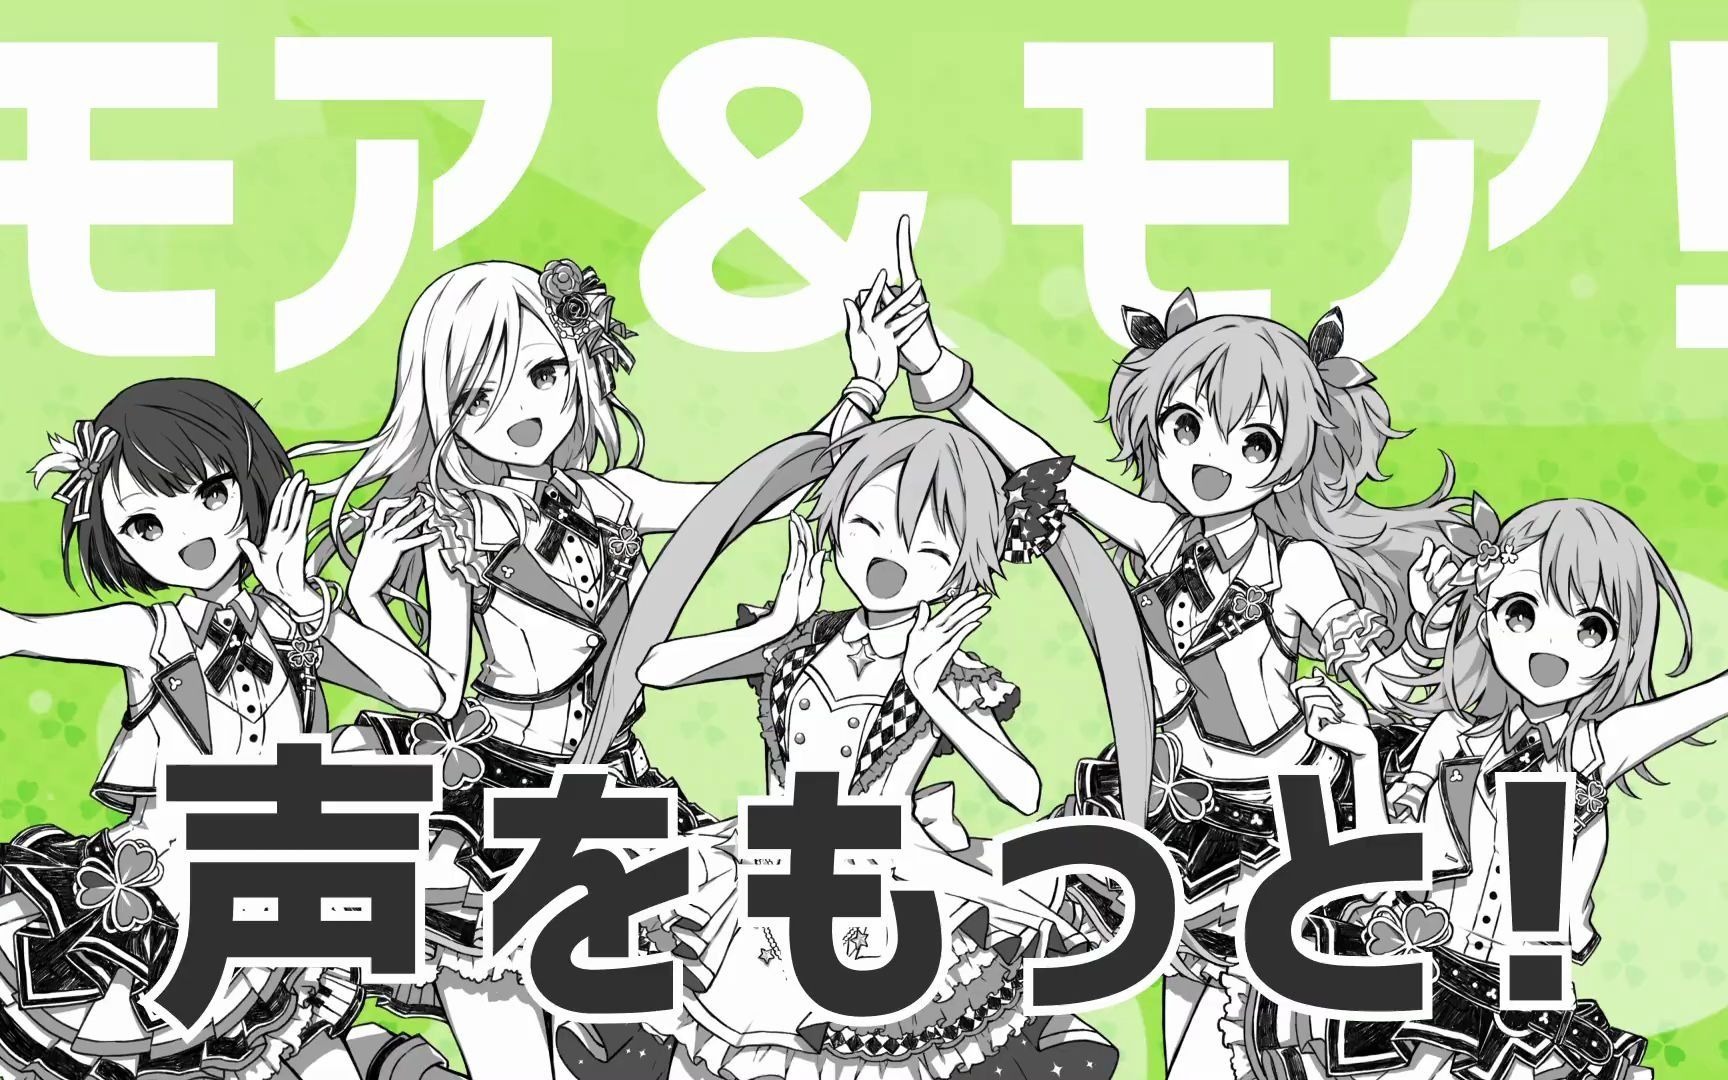 MORE MORE JUMP!×初音ミク】モア！ジャンプ！モア！(More！Jump！More 